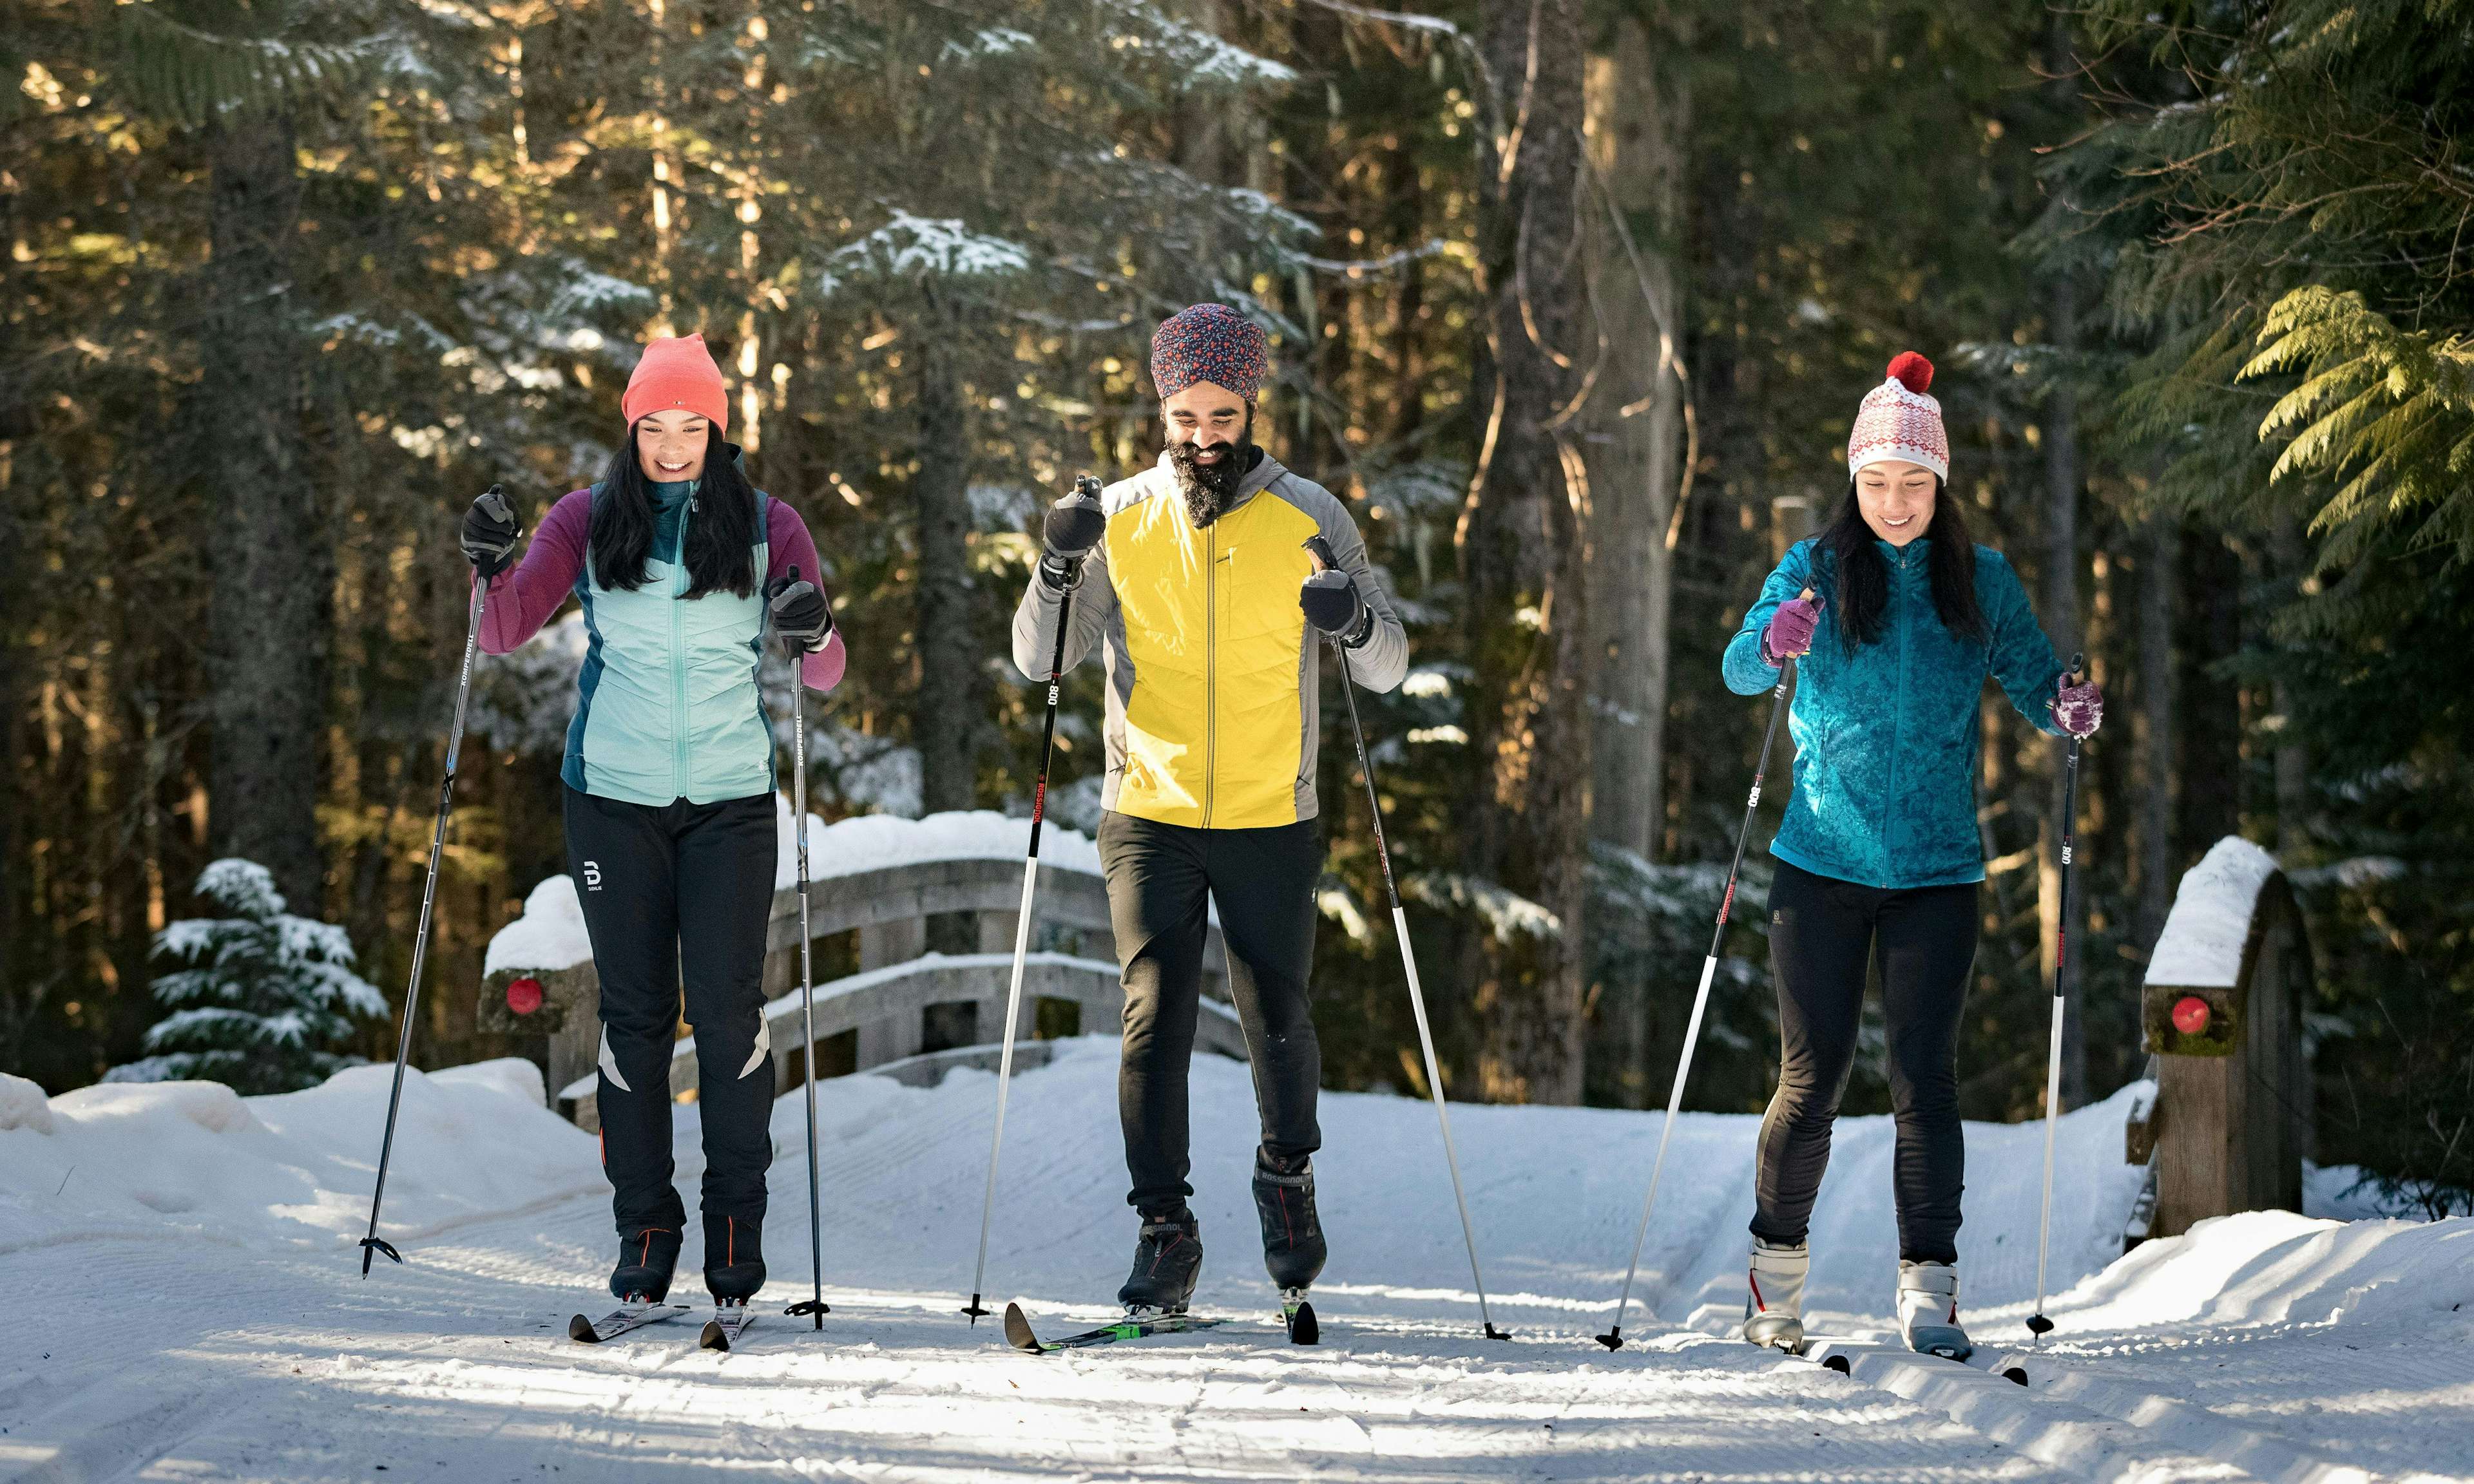 Three people cross-country skiing and smiling